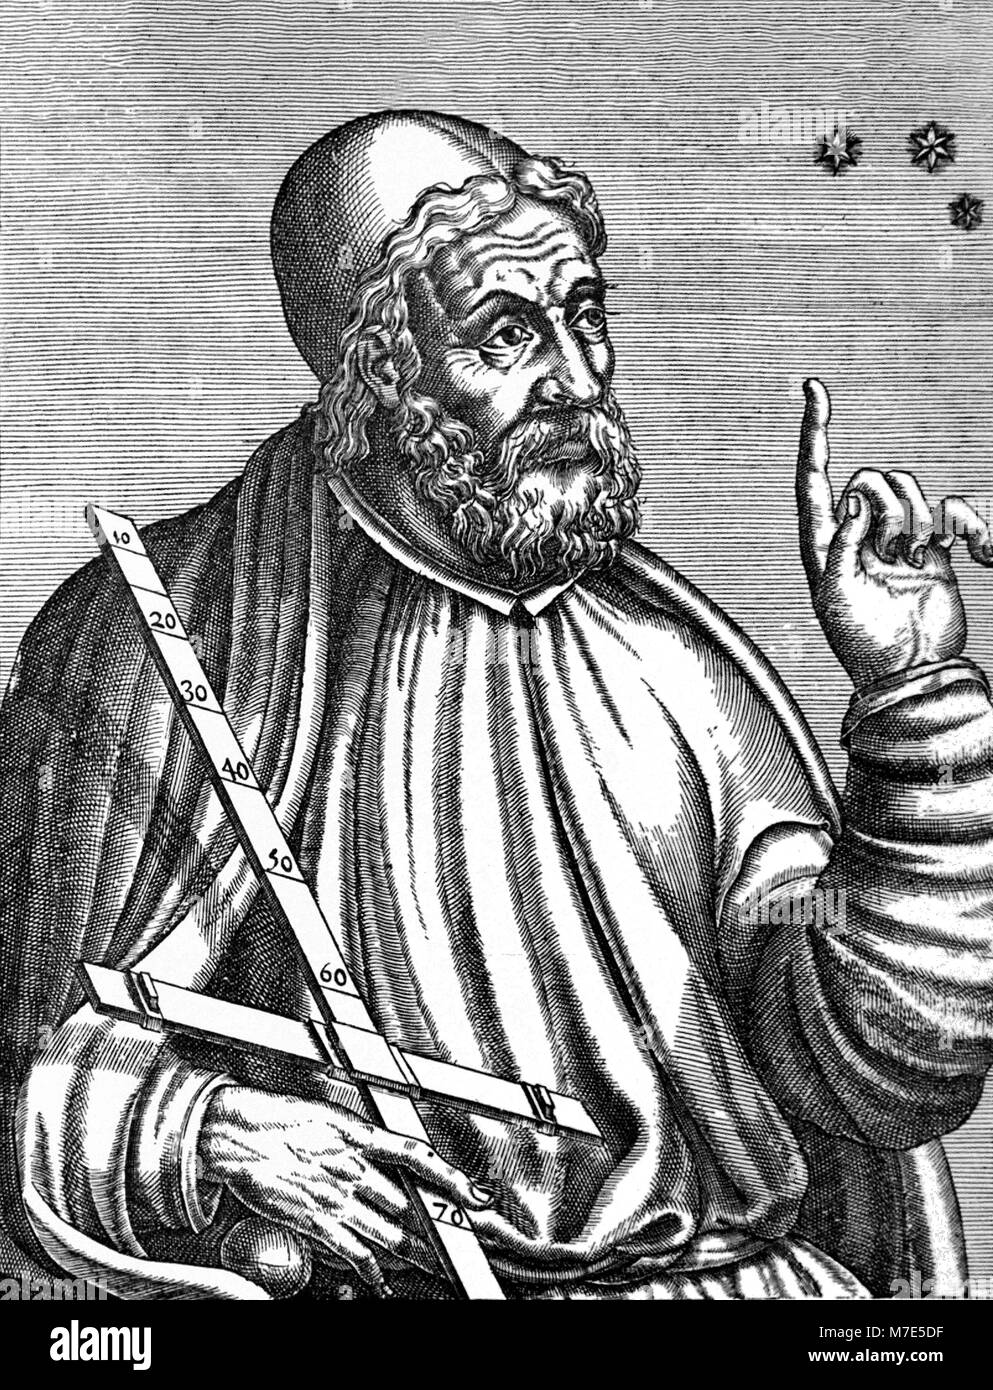 Ptolemy. Illustration of the Greco-Roman mathematician and astronomer, Claudius Ptolemy (c.AD 100-170) Stock Photo